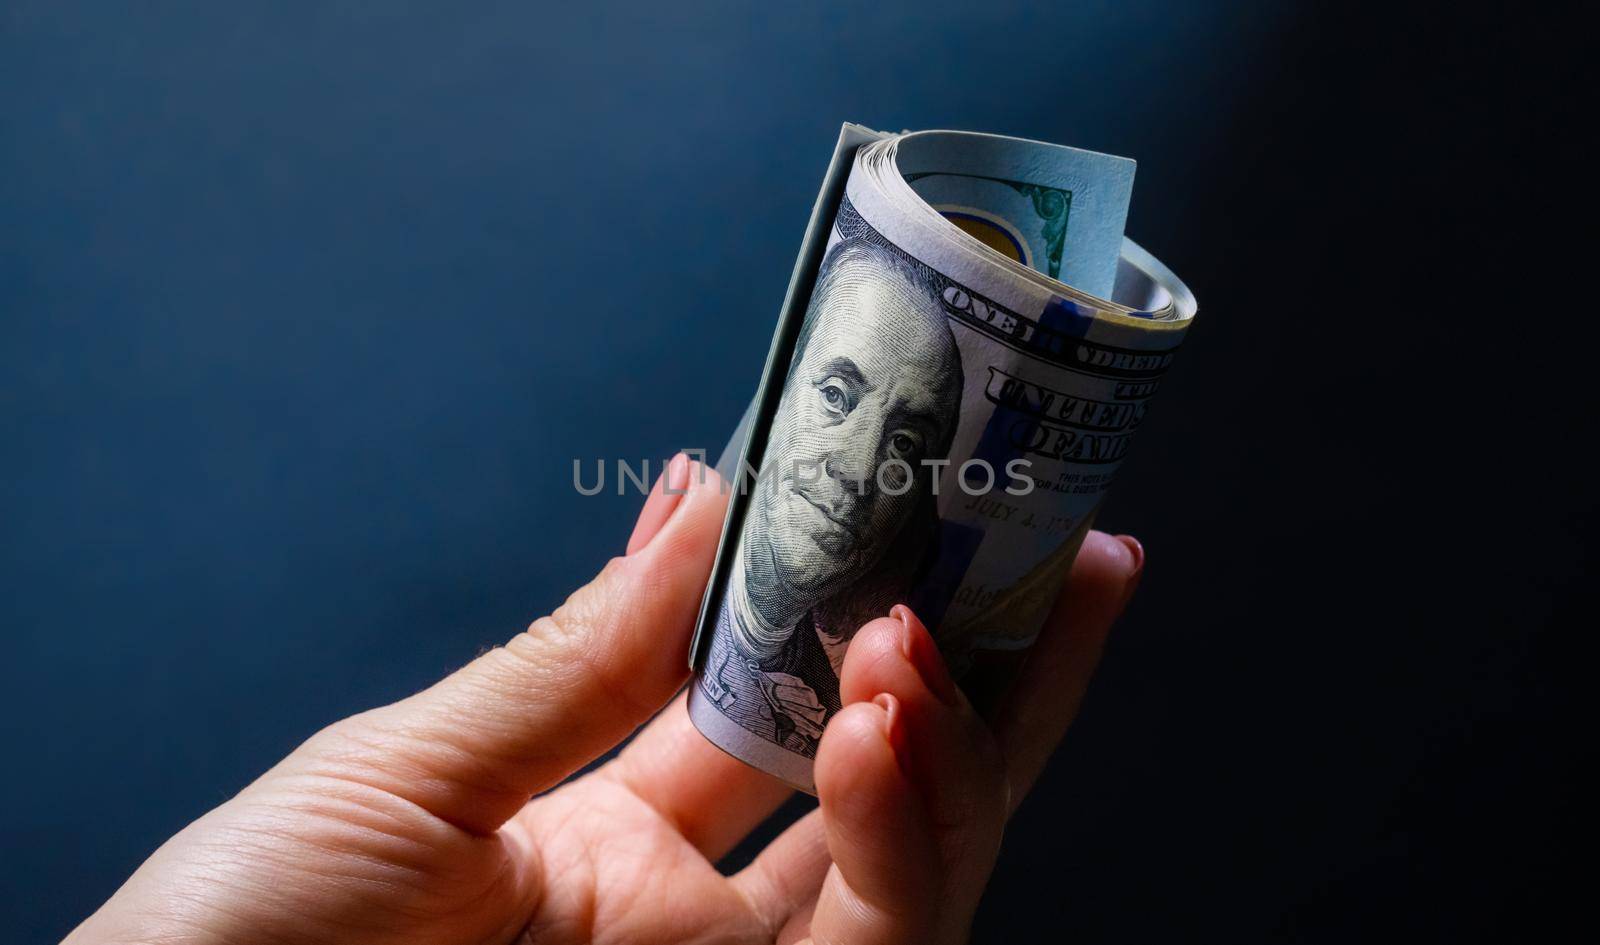 Hand holding banknotes by GekaSkr